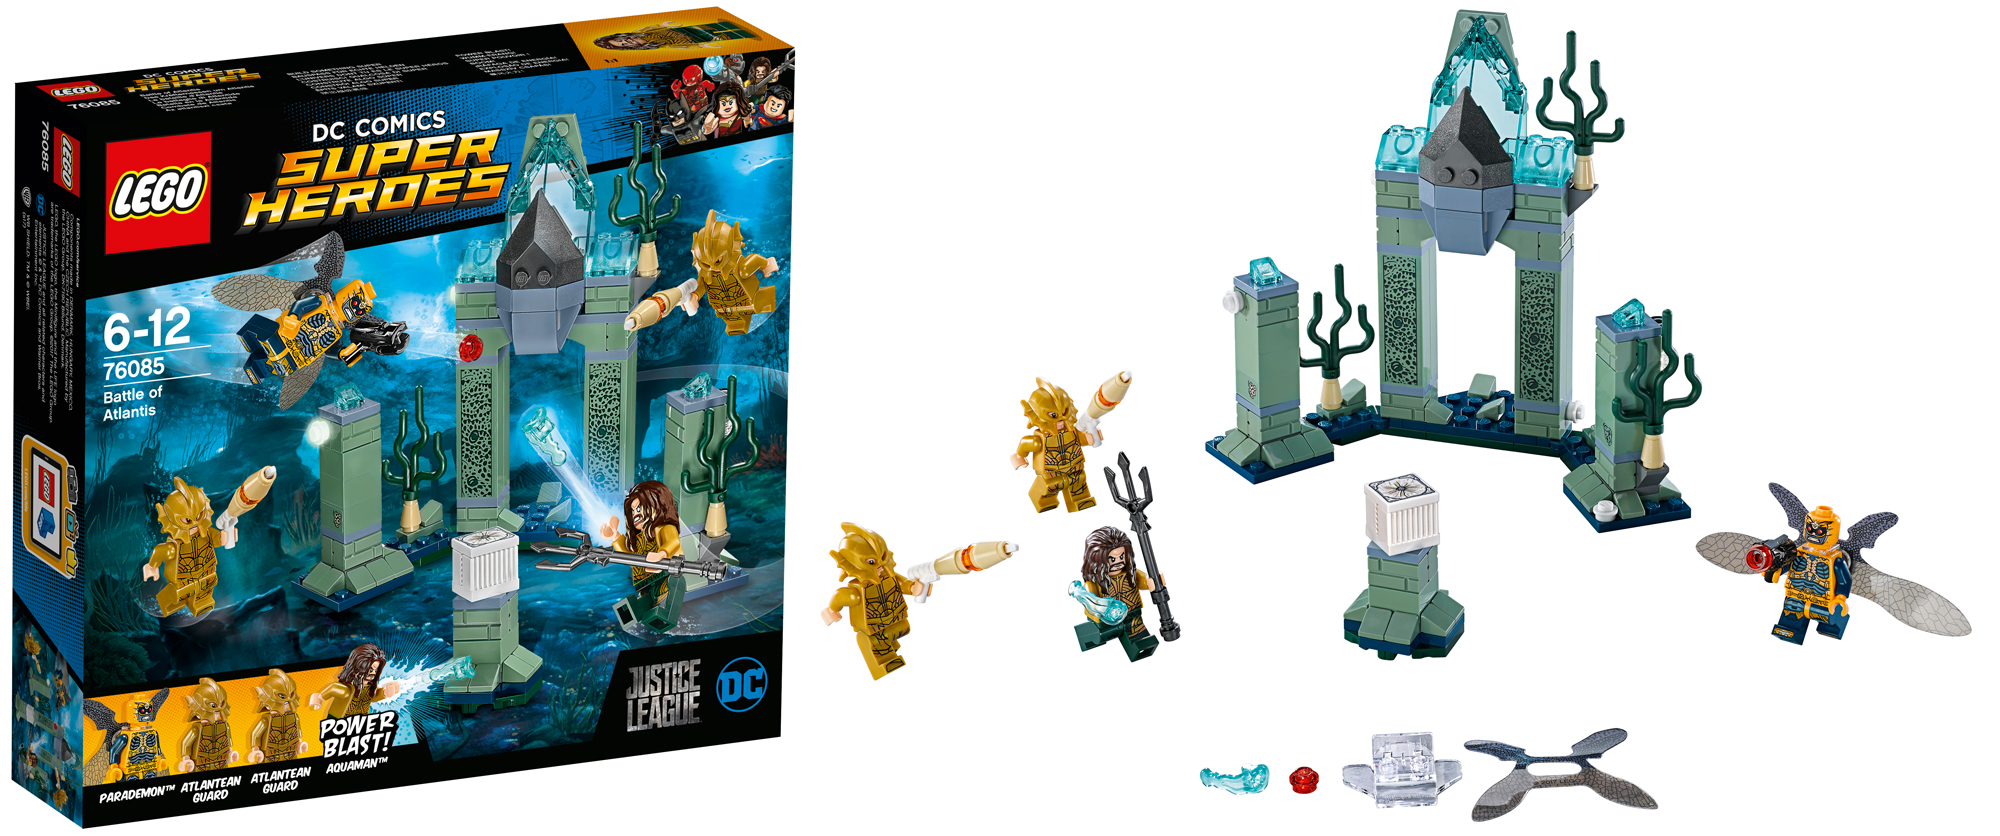 LEGO’s Justice League Sets Reveal The Film’s Villains, And More Of Batman’s Wonderful Toys